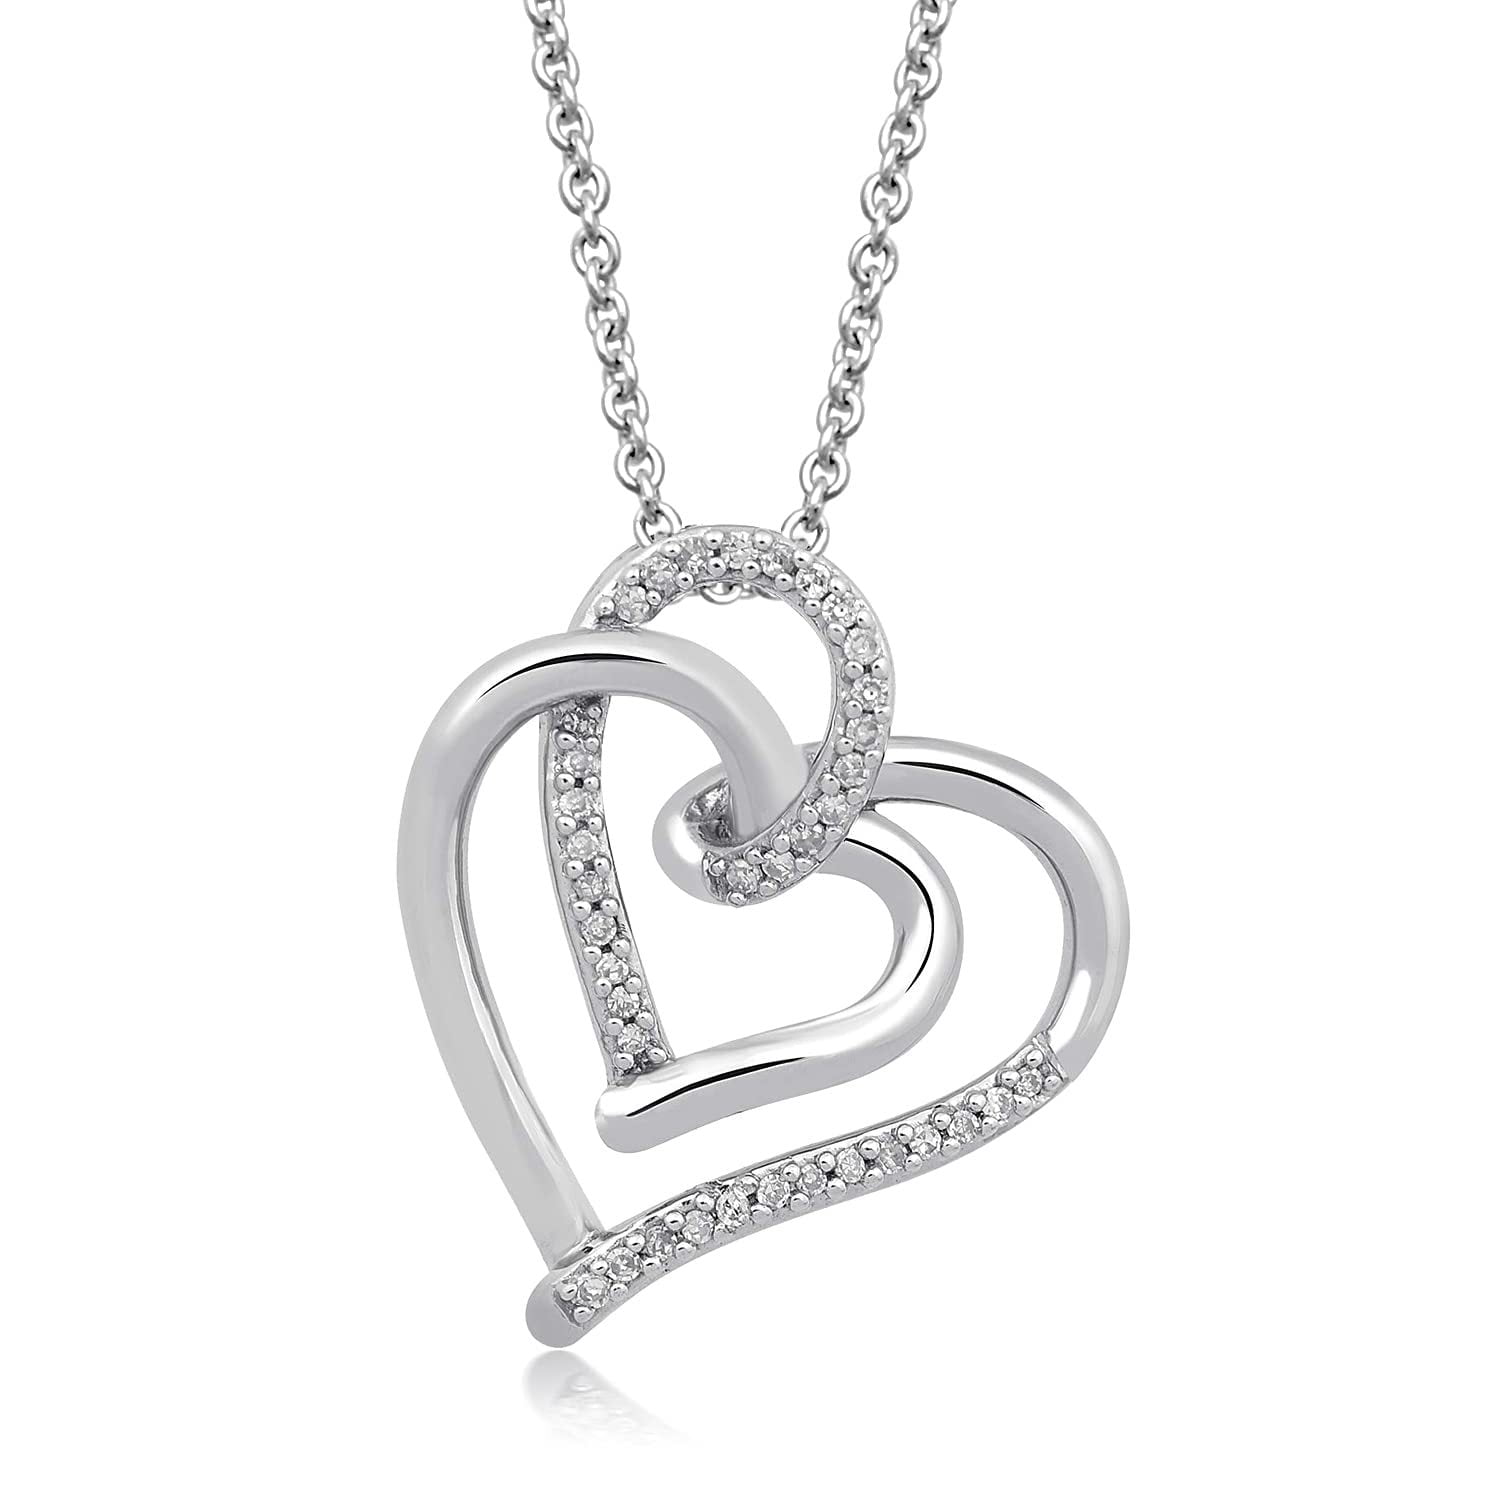 Charmsy Sterling Silver Jewelry Dainty Two-Tone Heart Pendant with Cable Chain for Teen Women 21 MM